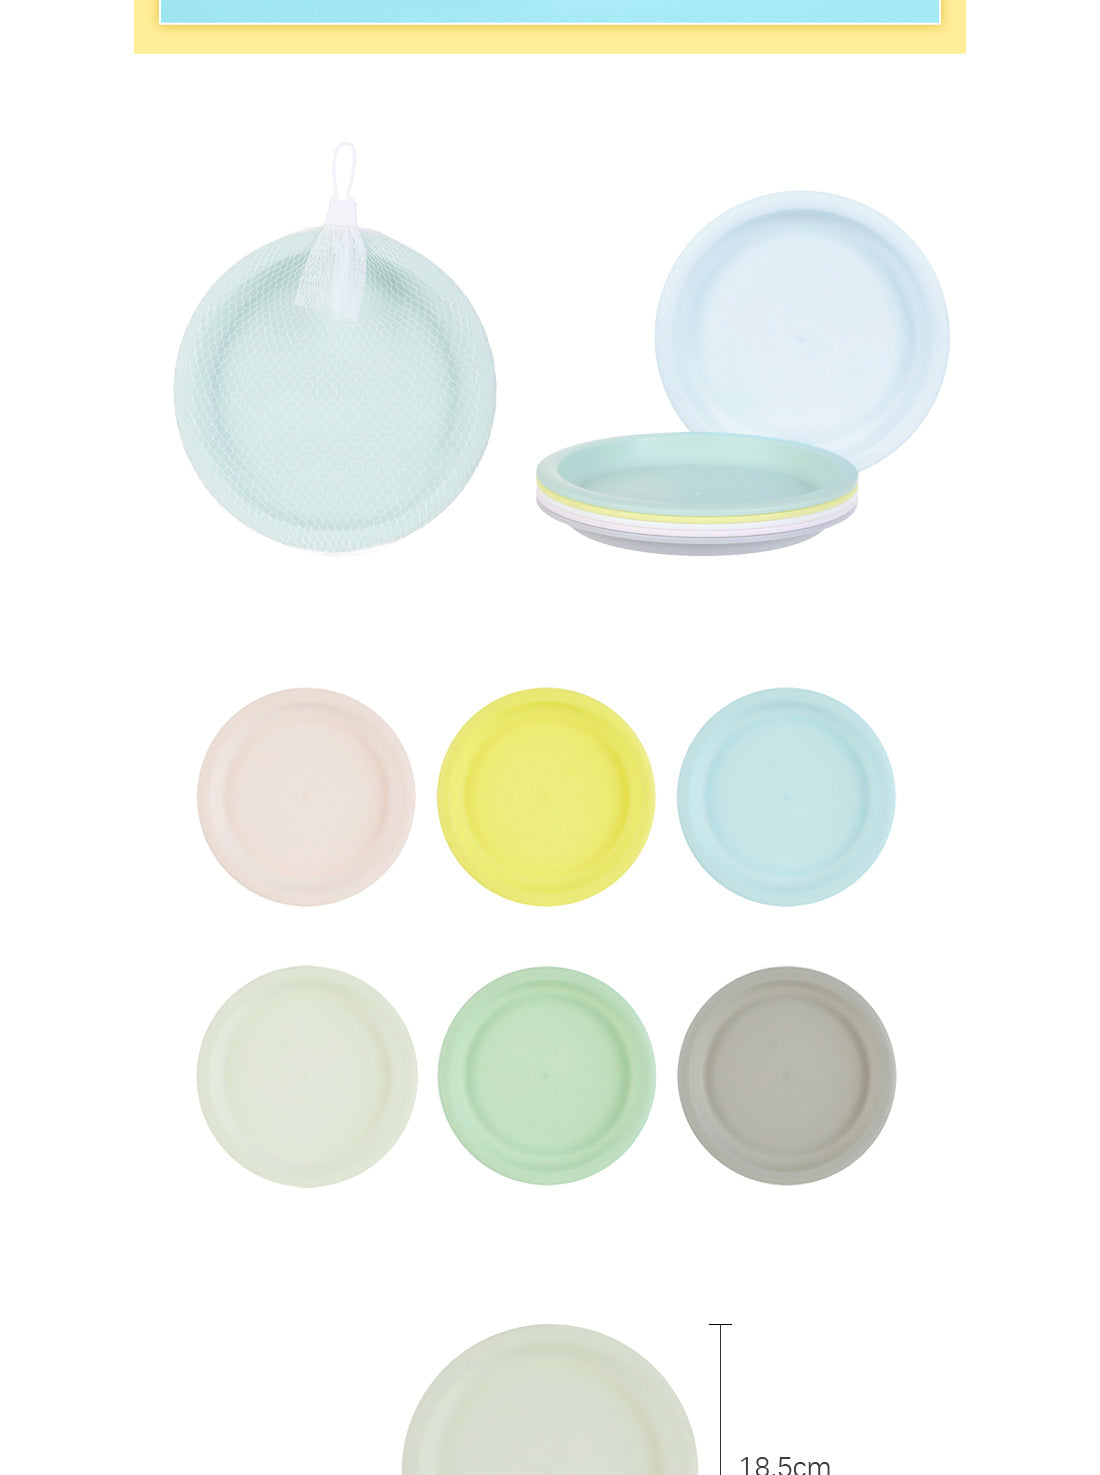 MINISO COLORFUL ECO-FRIENDLY PLATE 6 PACK 2006877610104 BOWL/PLATE/DISH